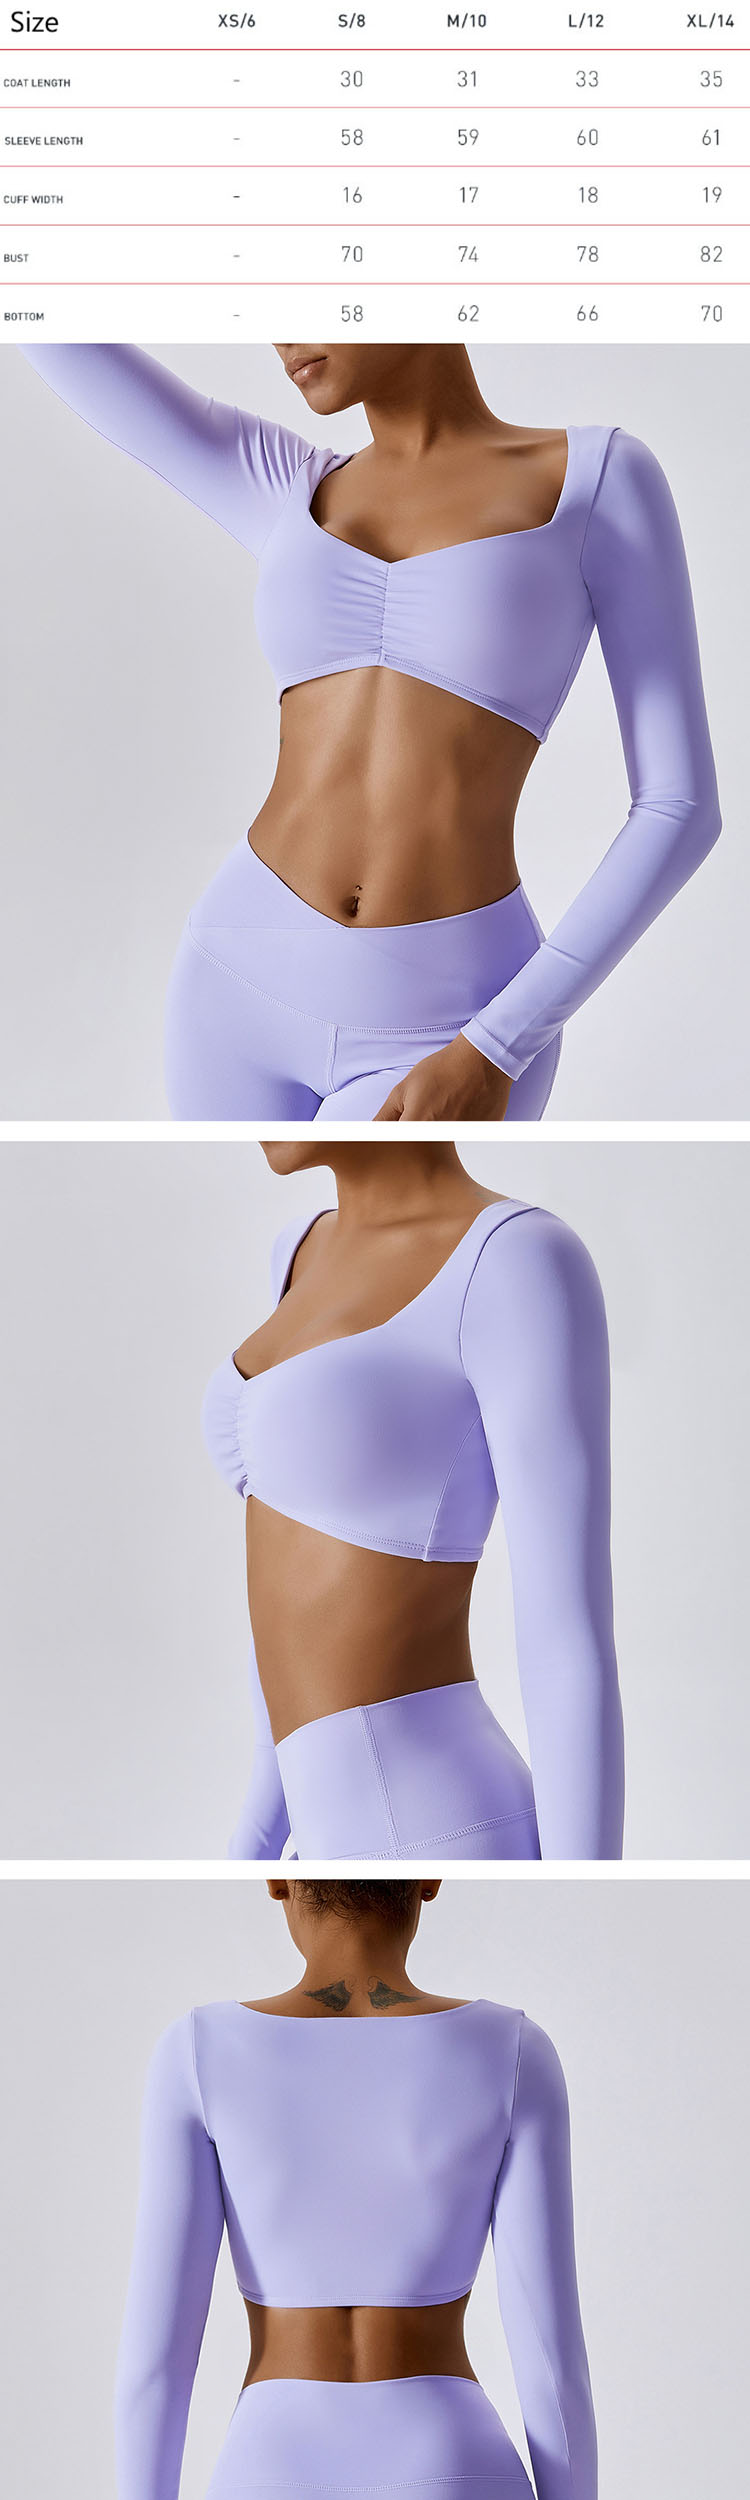 Pleats add a very girly touch to the plus size sports bra